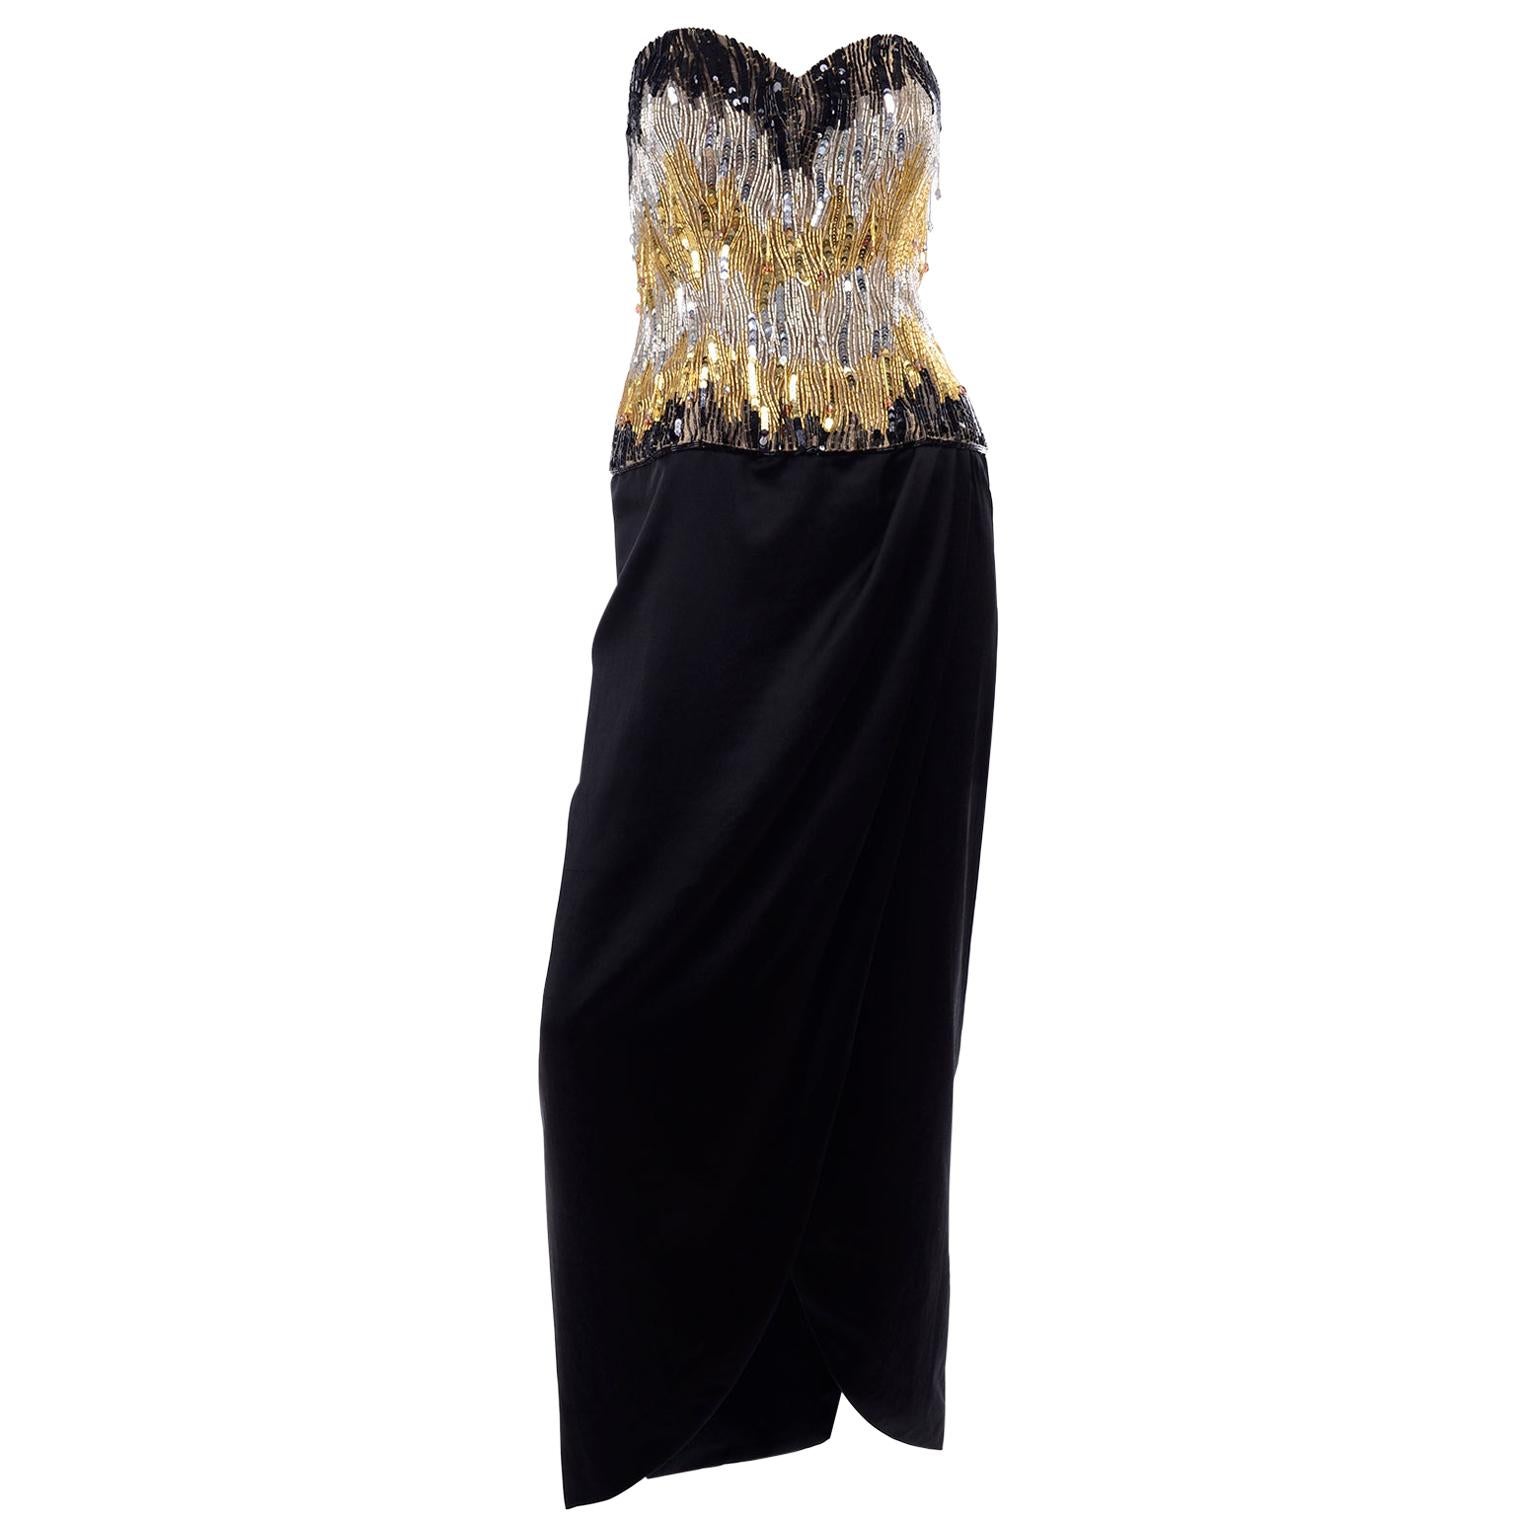 1980s Ann Lawrence Vintage Gold & Black Evening Dress w Beads Sequins & Crystals For Sale